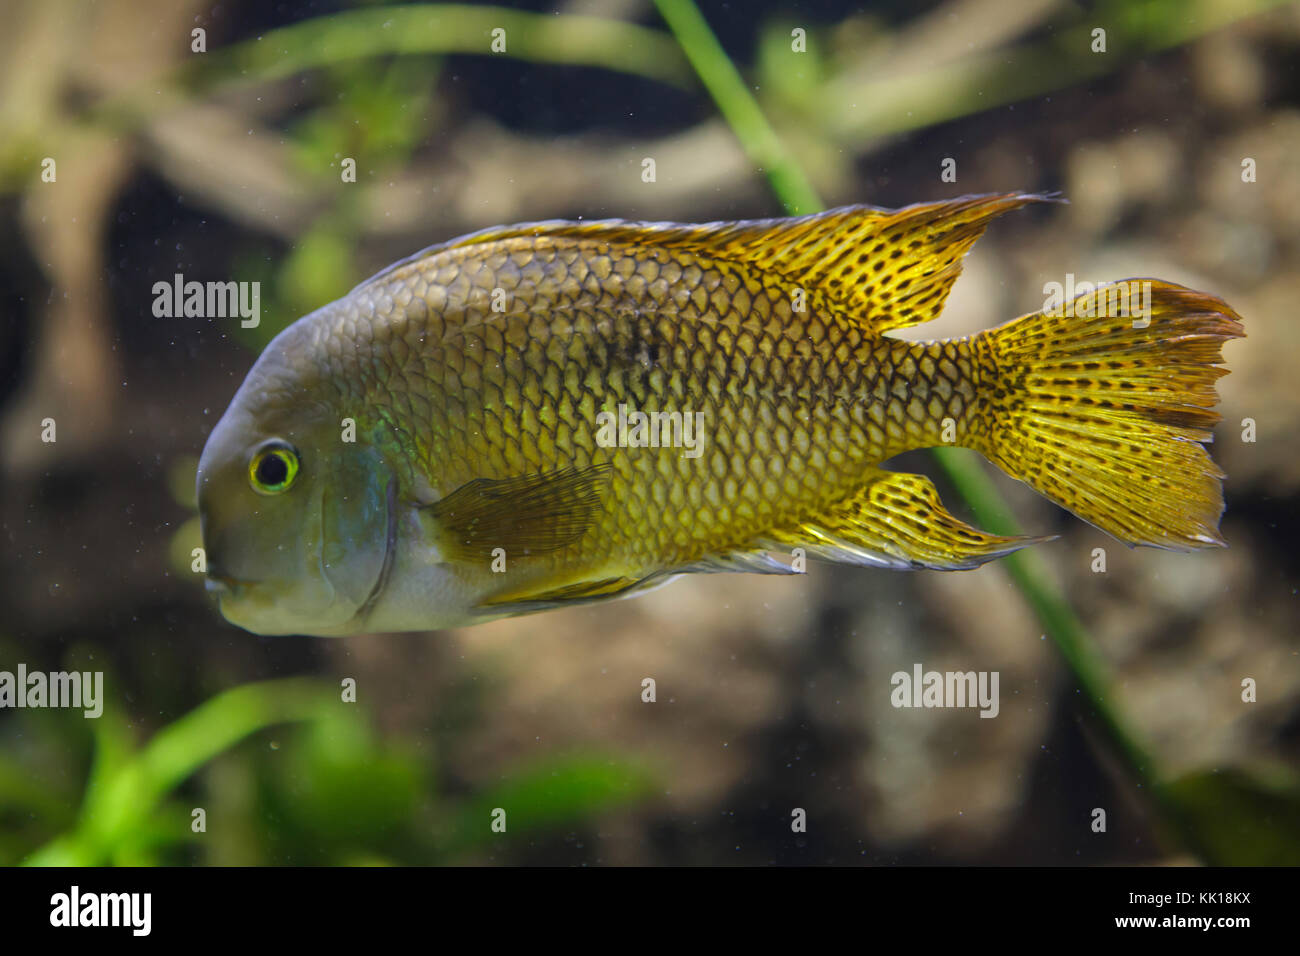 Moga (Hypsophrys nicaraguensis), also known as the nickie or parrot cichlid. Stock Photo